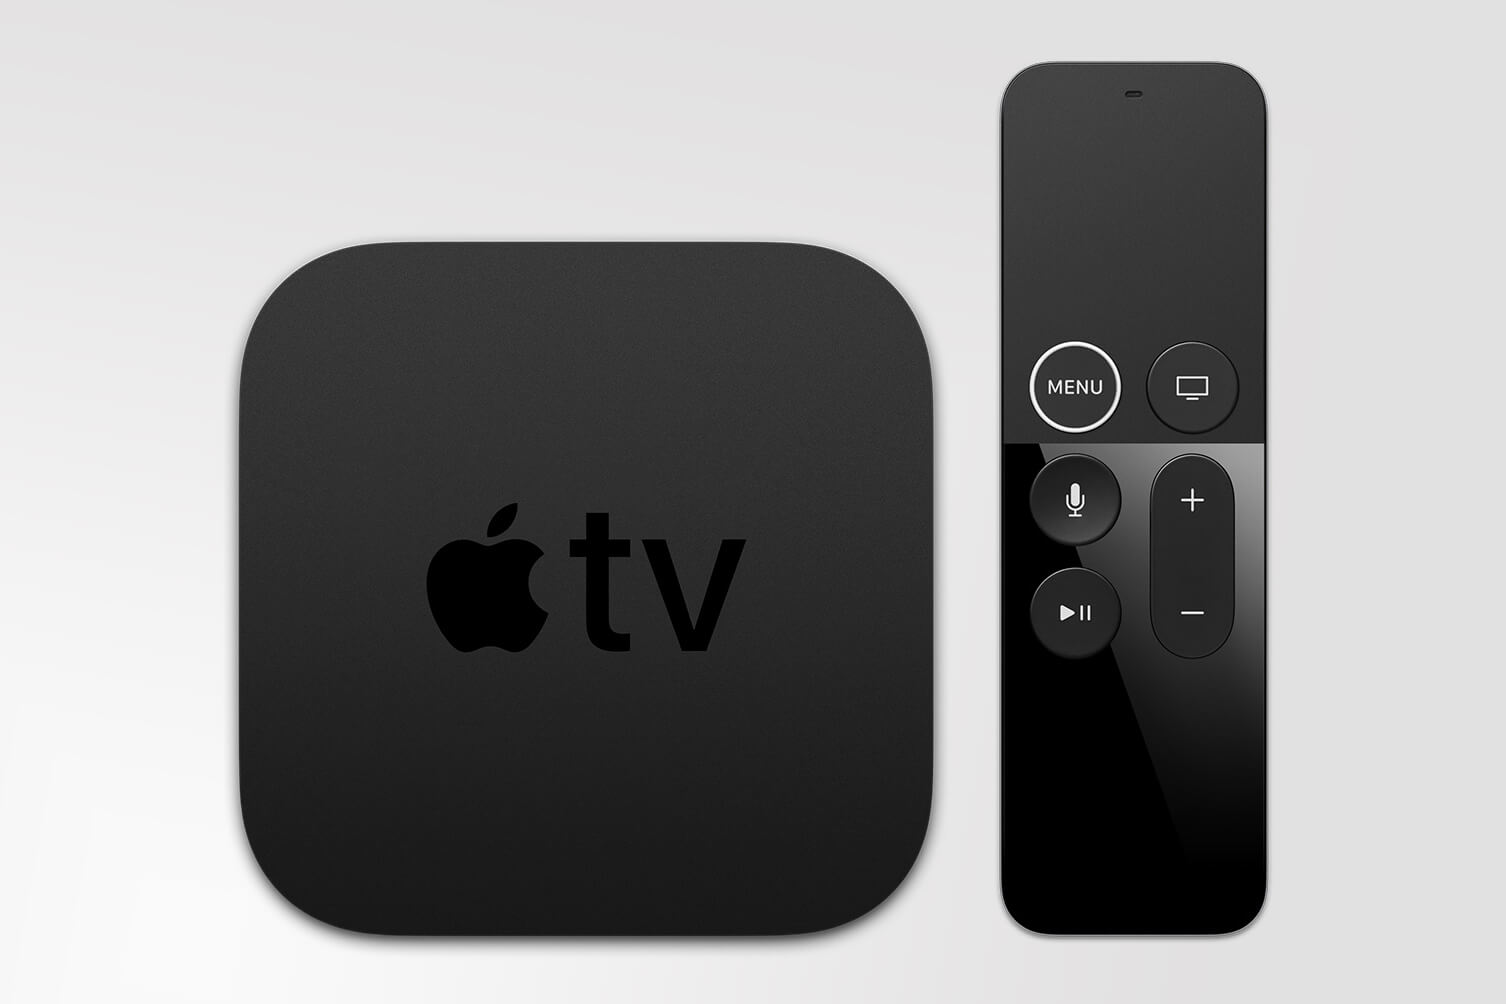 iTunes 4K content can only be streamed, not downloaded; new Apple TV can't play 4K YouTube videos